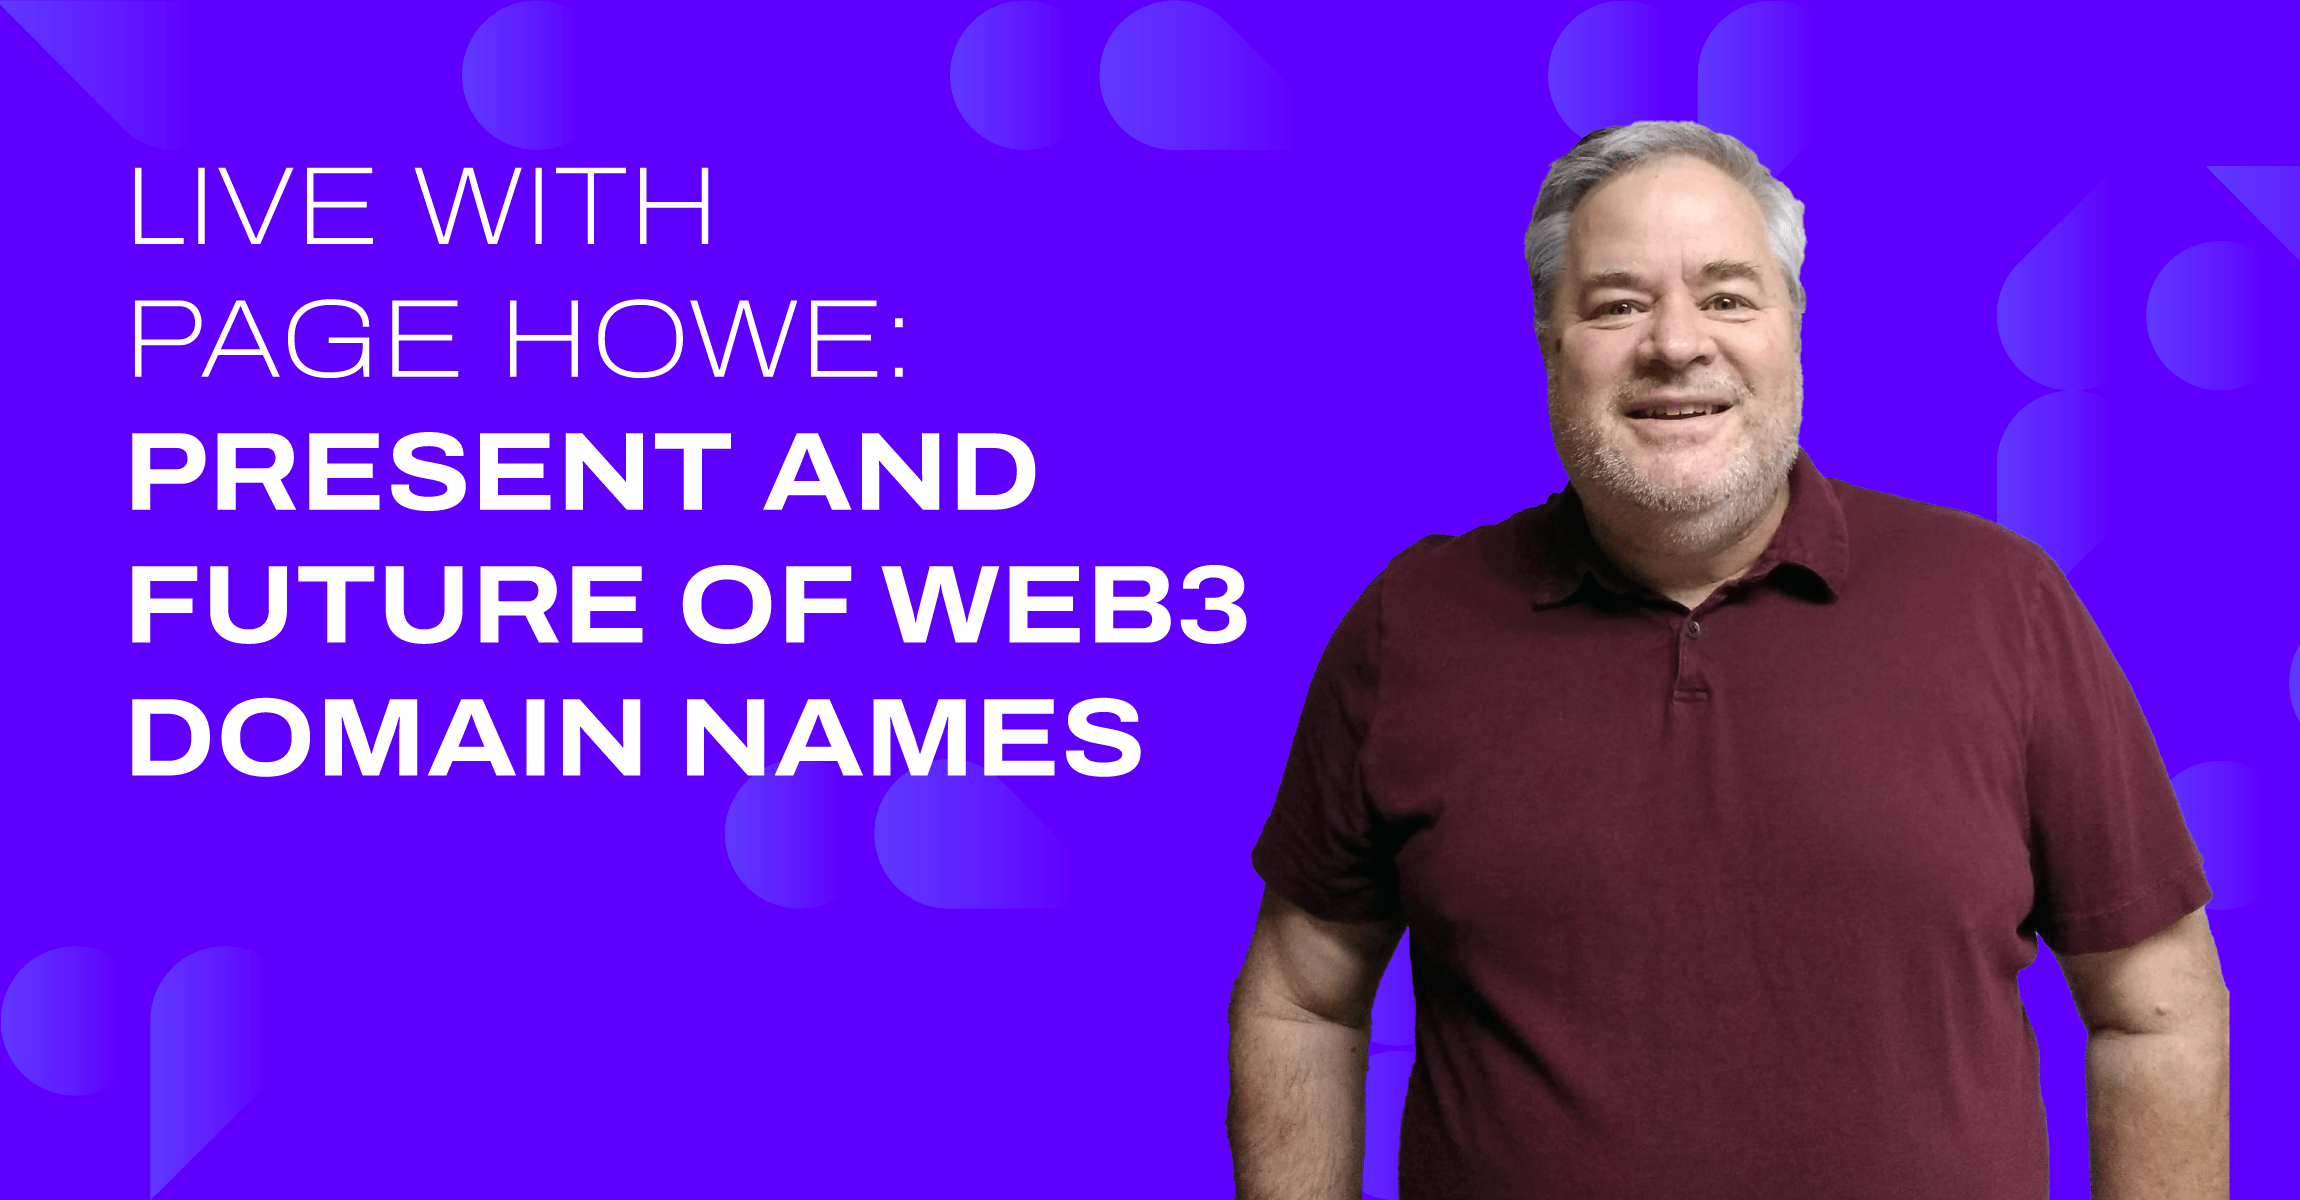 Live with Page Howe: Presents and Future of Web3 Domain Names